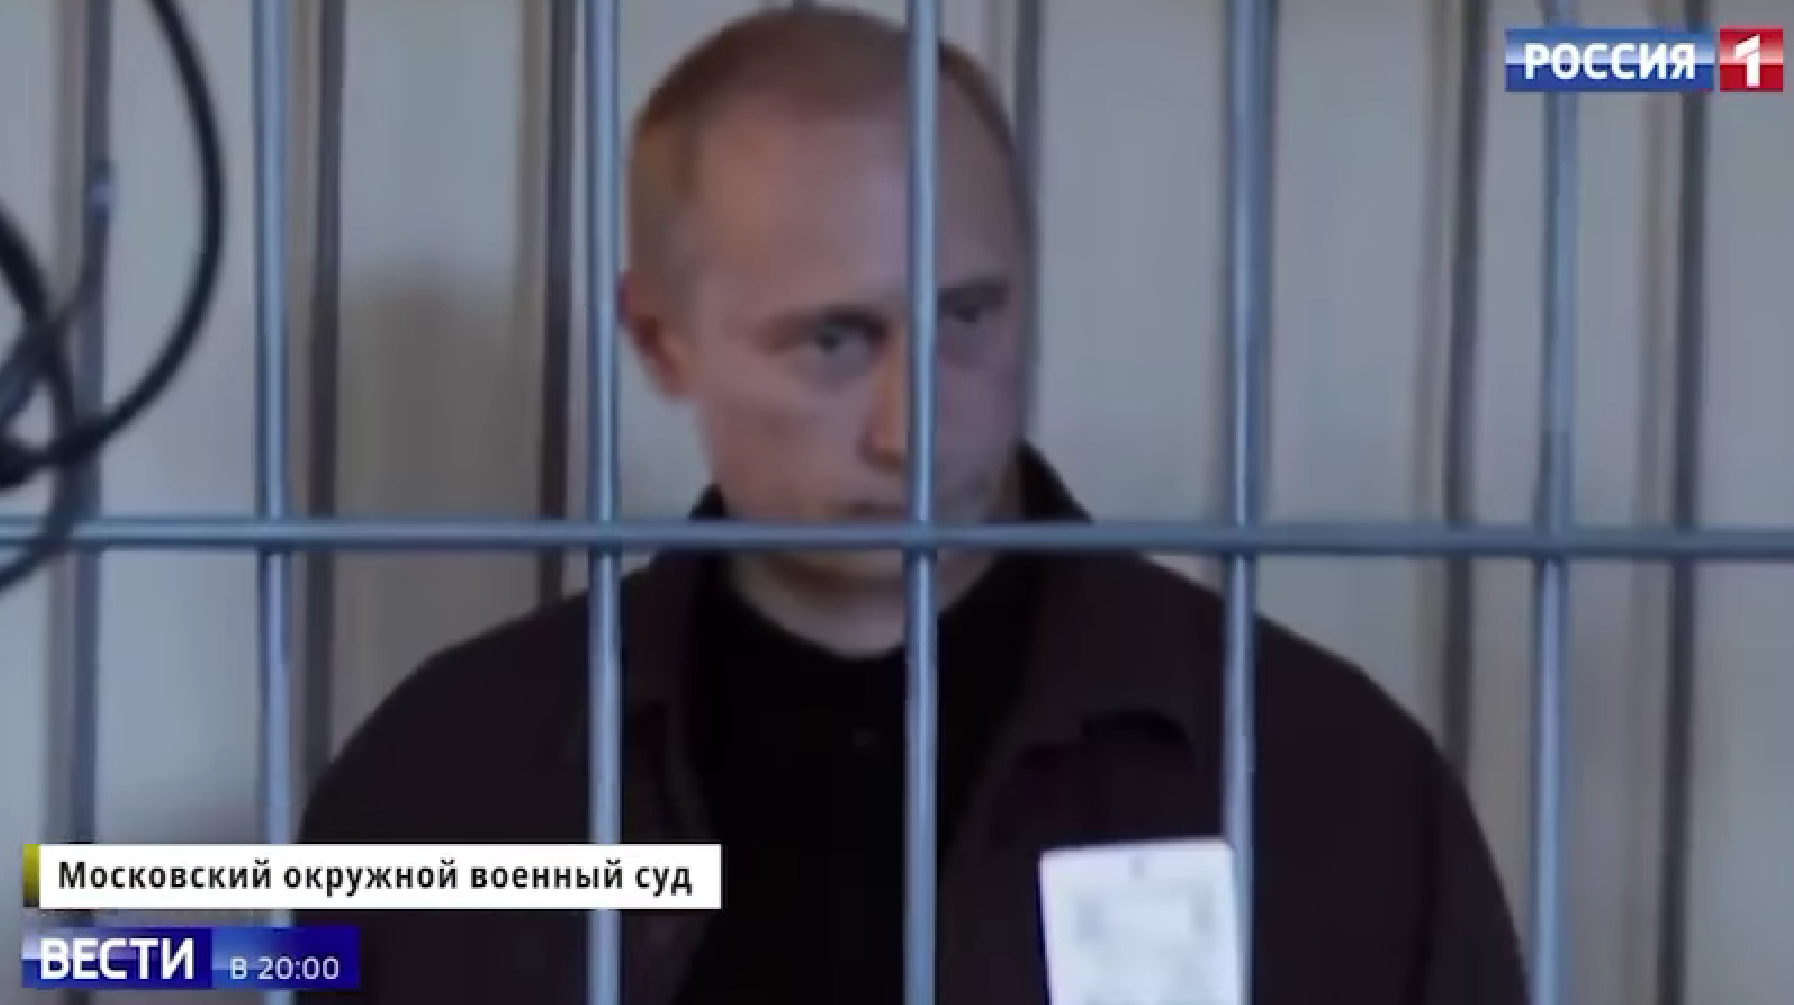 FAKE: Video of Putin behind bars in the courtroom